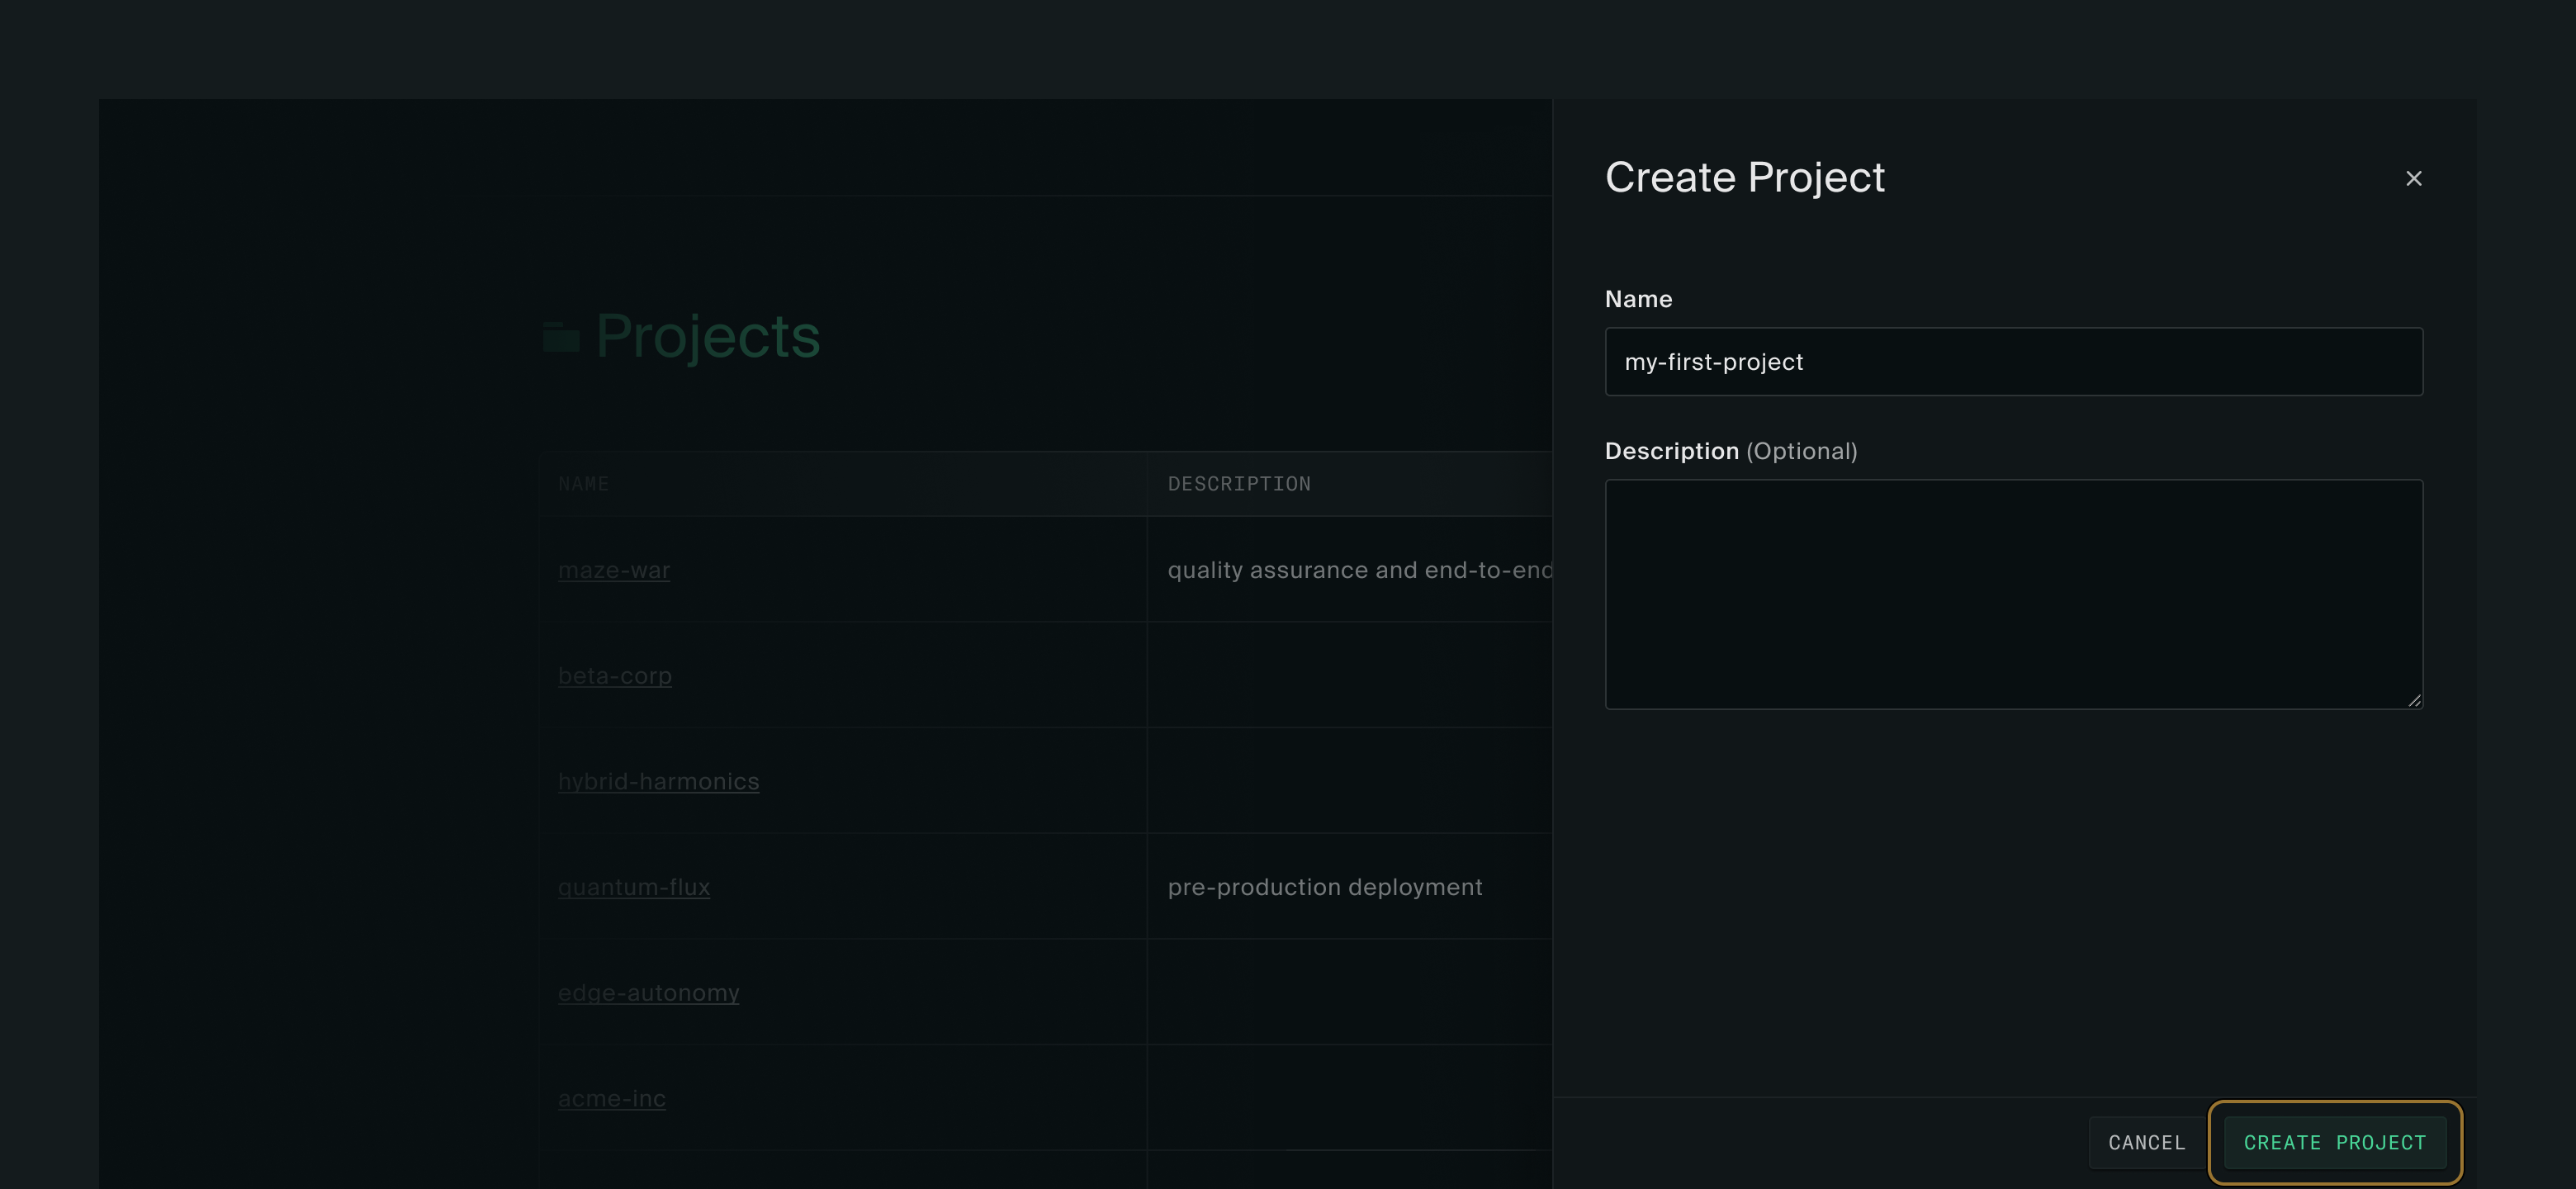 Modal form titled "Create Project"